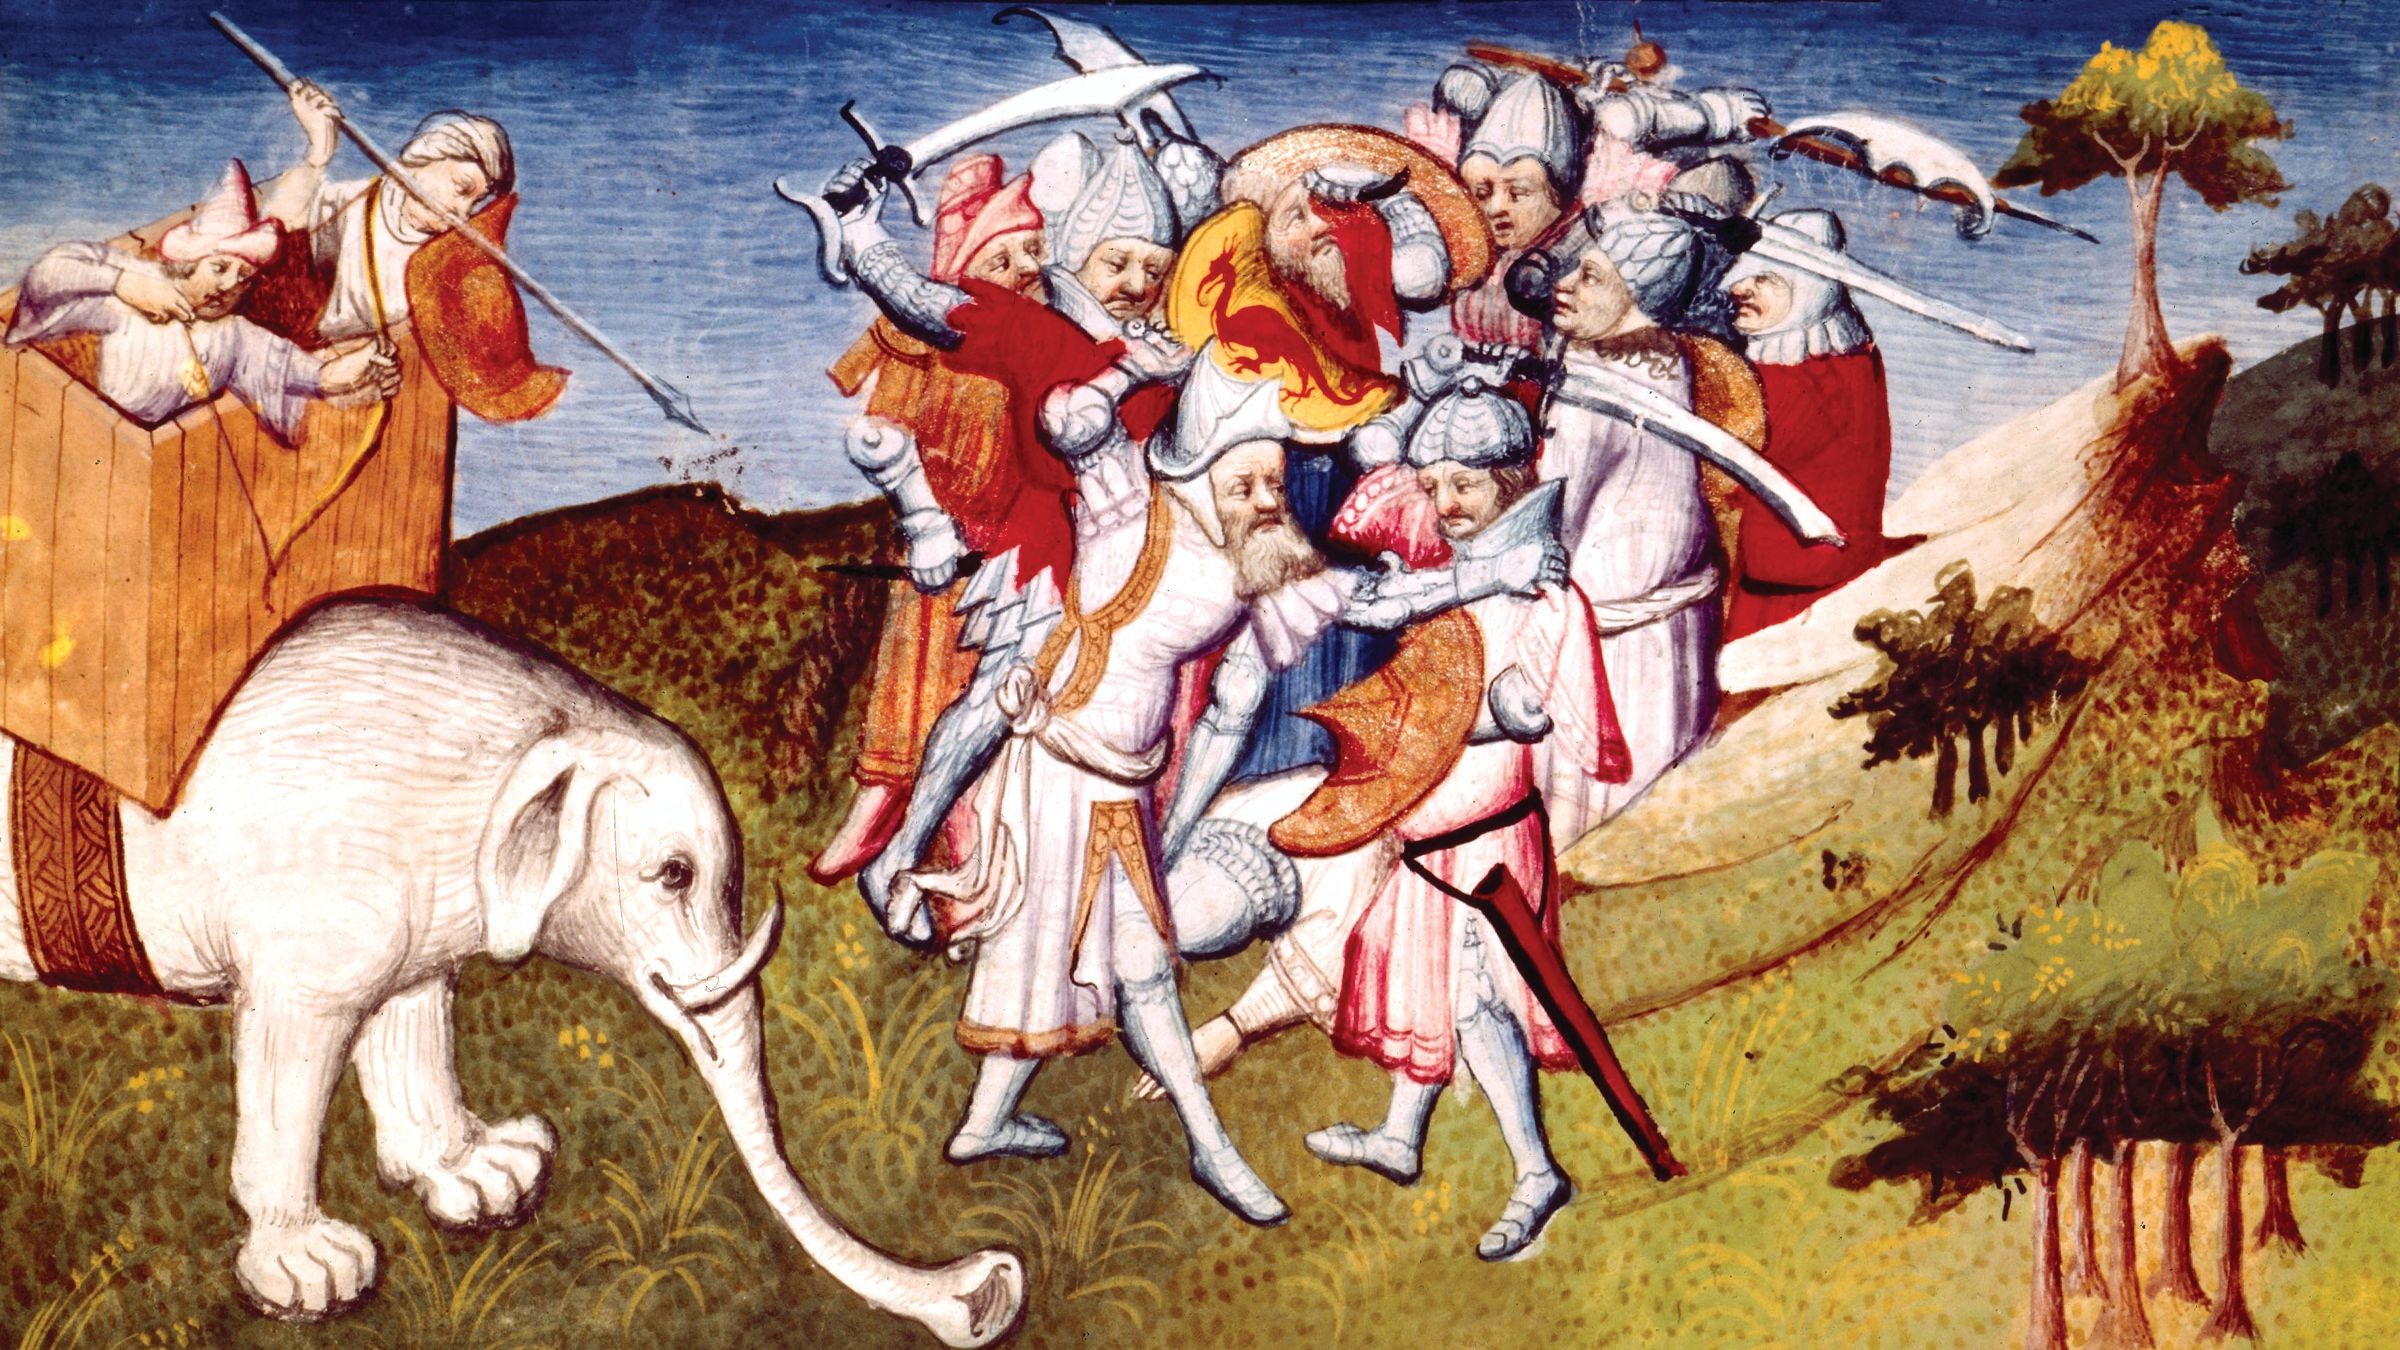 Kublai Khan’s loyalists attack the army of rebel leader Prince Nayan in 1287. By then, Kublai had completed the 74-year-long conquest of China, ending the Song Dynasty forever.